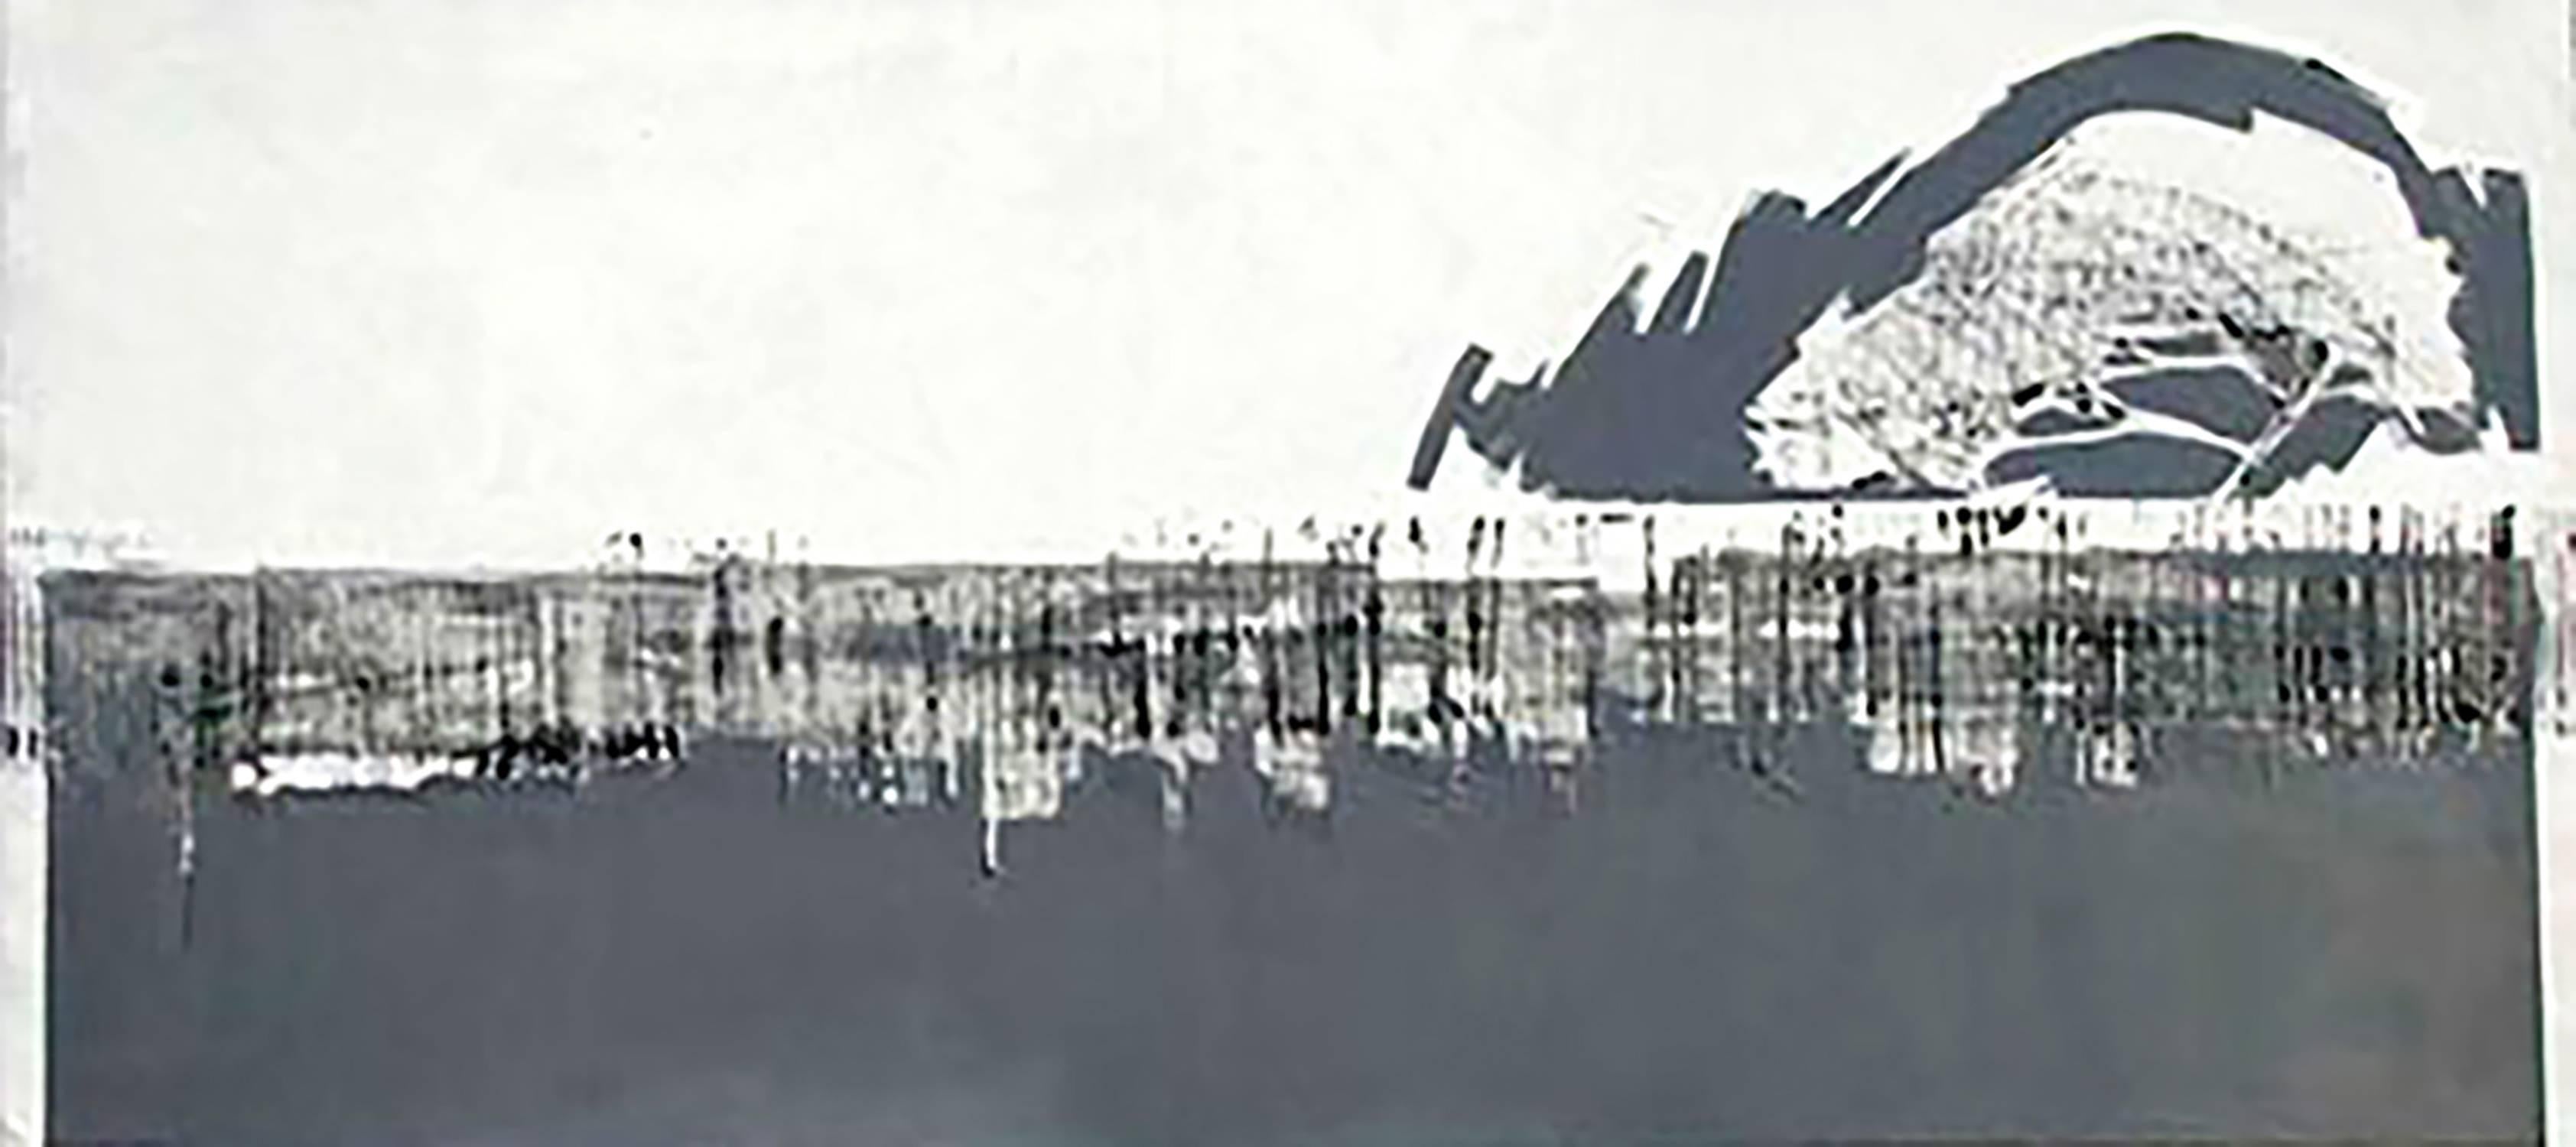 Patagonia Gris y Blanco, grey and white, abstract landscape painting, oil canvas - Painting by Maria Jose Concha